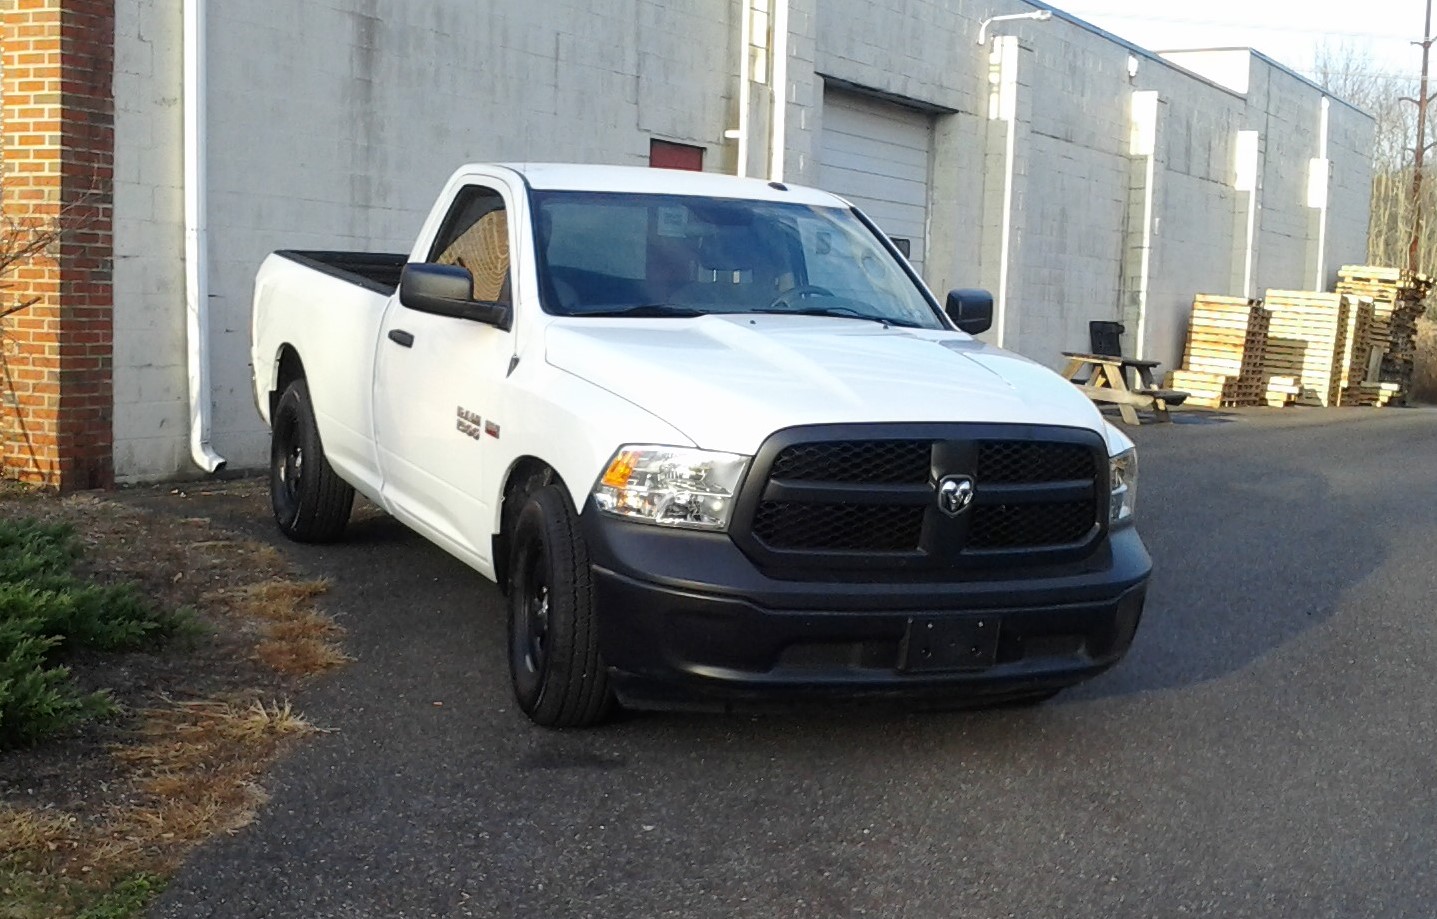 Attached picture 2014 White Ram.jpg